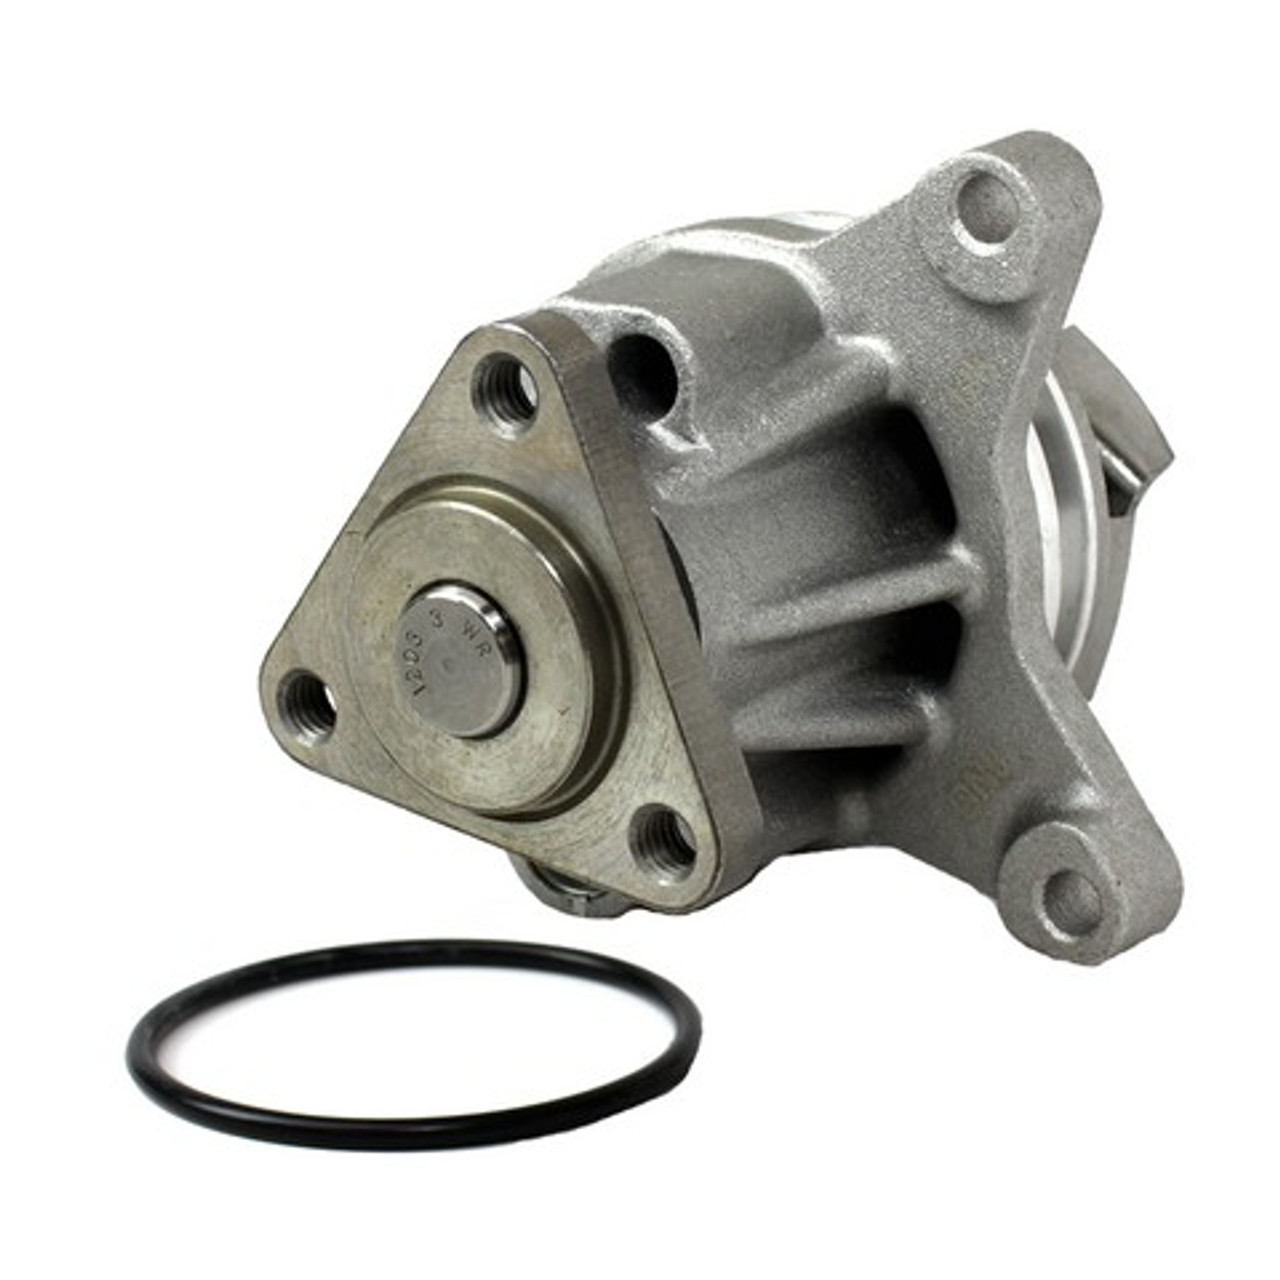 Water Pump 2.5L 2014 Ford Fusion - WP4032.50